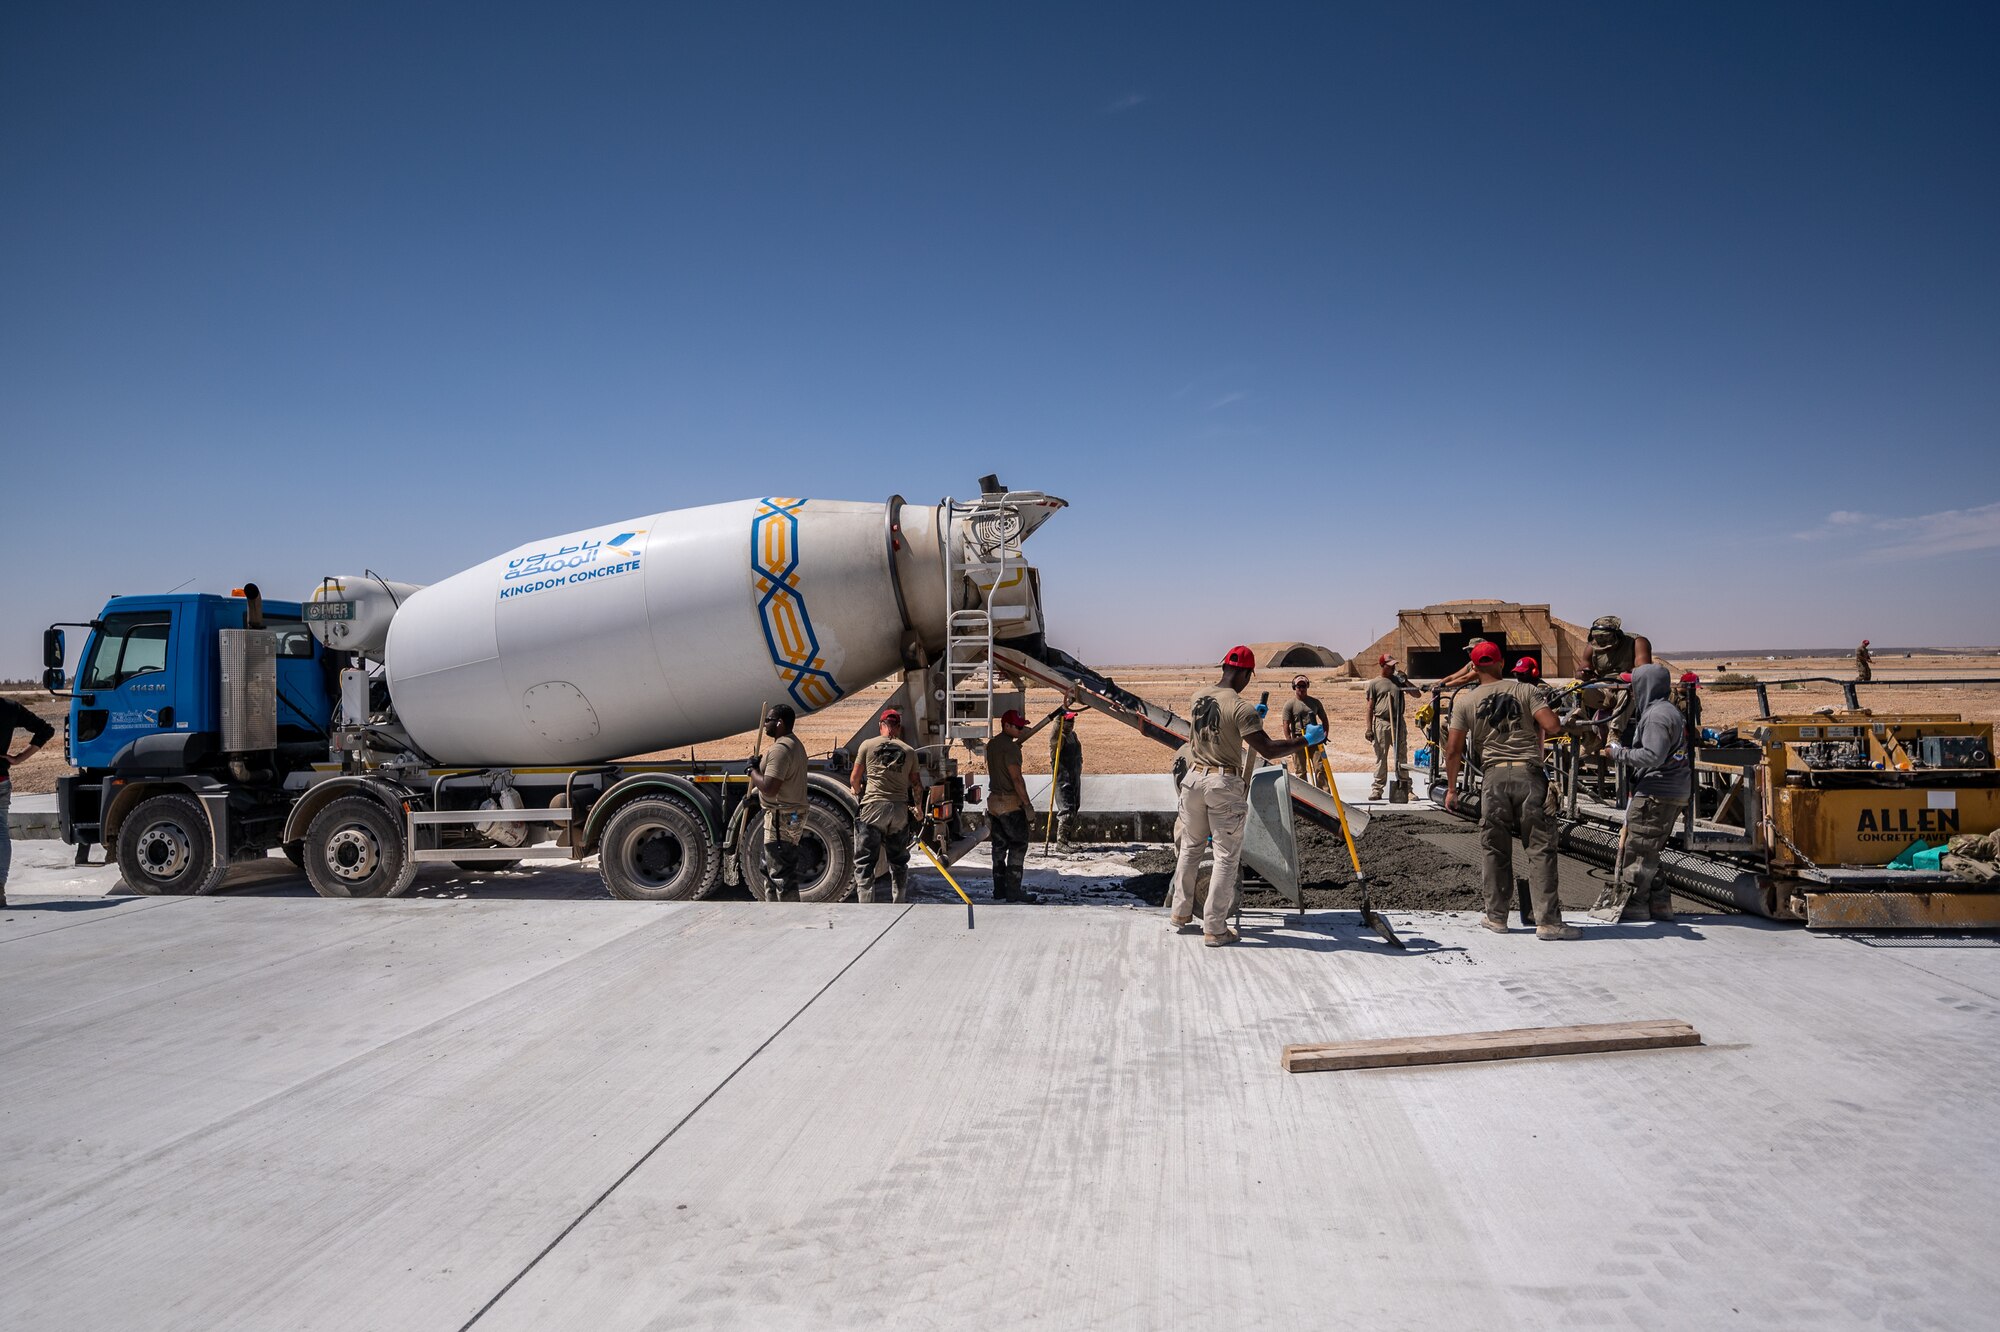 1st Expeditionary Civil Engineer Group Airmen pour more than 12,000 cubic meters of concrete for a runway overrun repair project at an undisclosed location in Southwest Asia, April 14, 2022 (U.S. Air Force photo by Master Sgt. Christopher Parr)